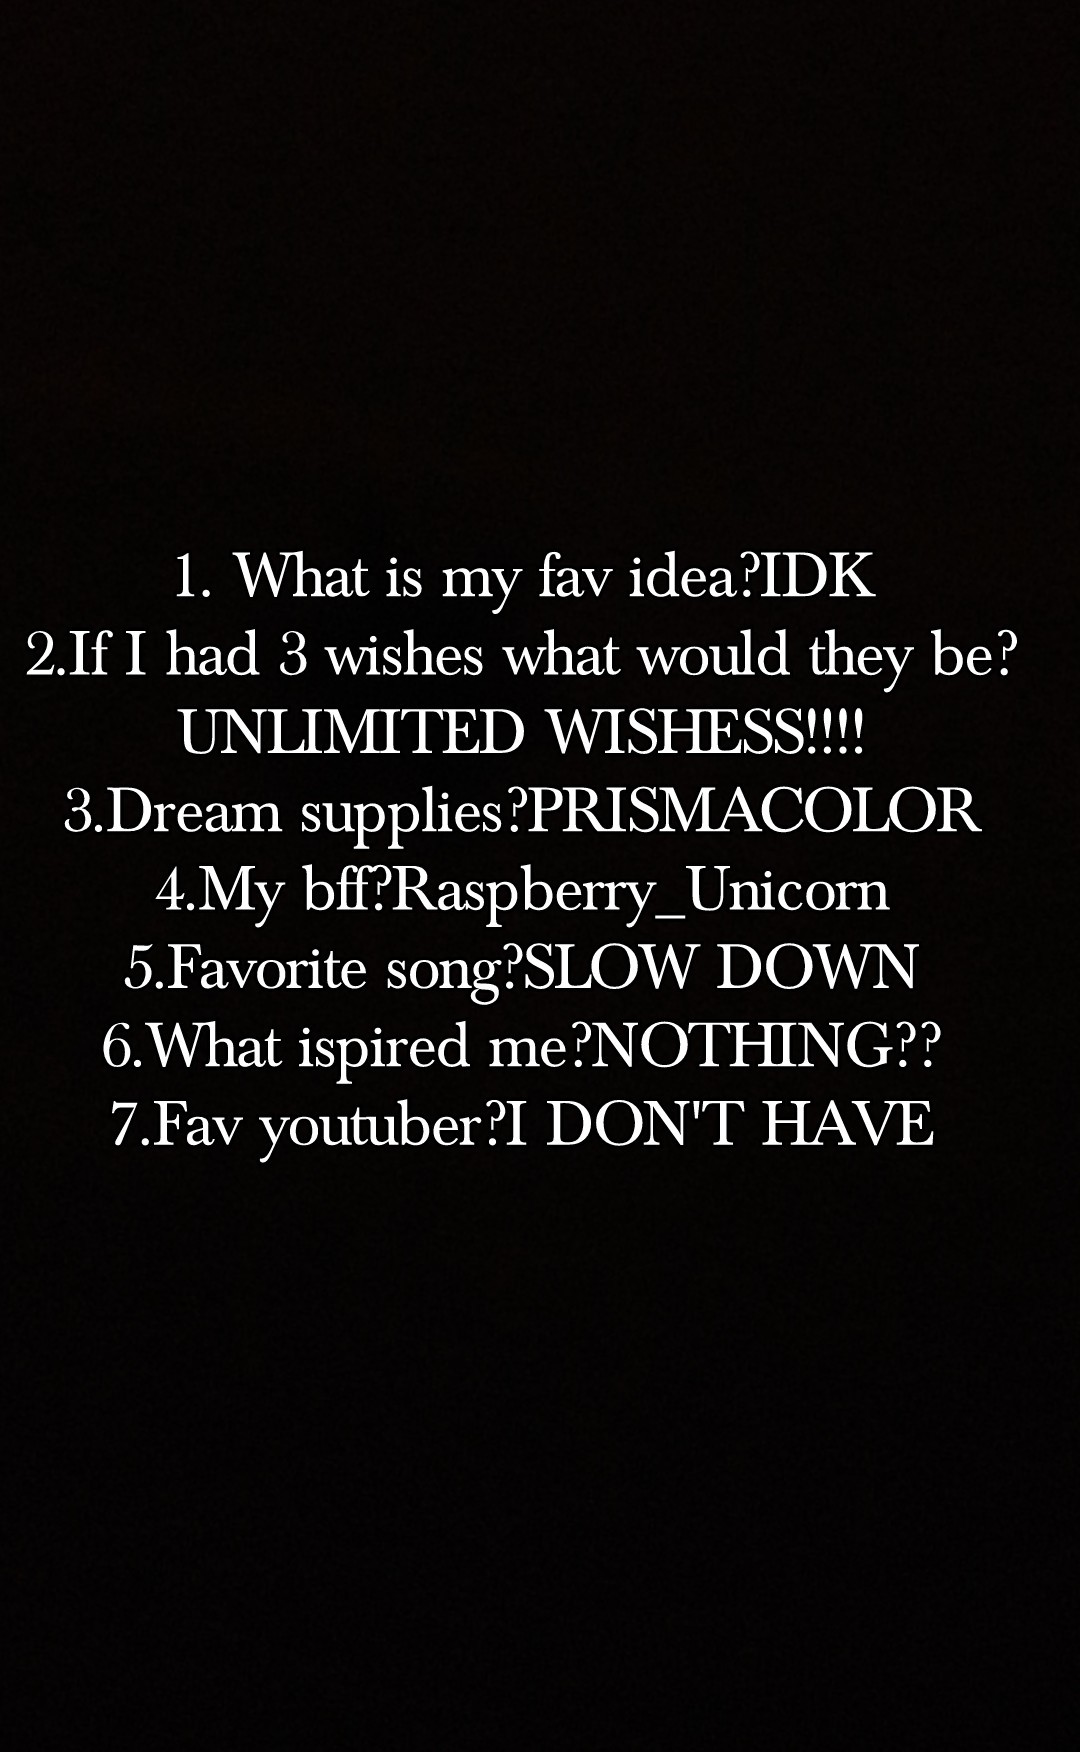 1. What is my fav idea?IDK
2.If I had 3 wishes what would they be? UNLIMITED WISHESS!!!!
3.Dream supplies?PRISMACOLOR
4.My bff?Raspberry_Unicorn
5.Favorite song?SLOW DOWN
6.What ispired me?NOTHING??
7.Fav youtuber?I DON'T HAVE